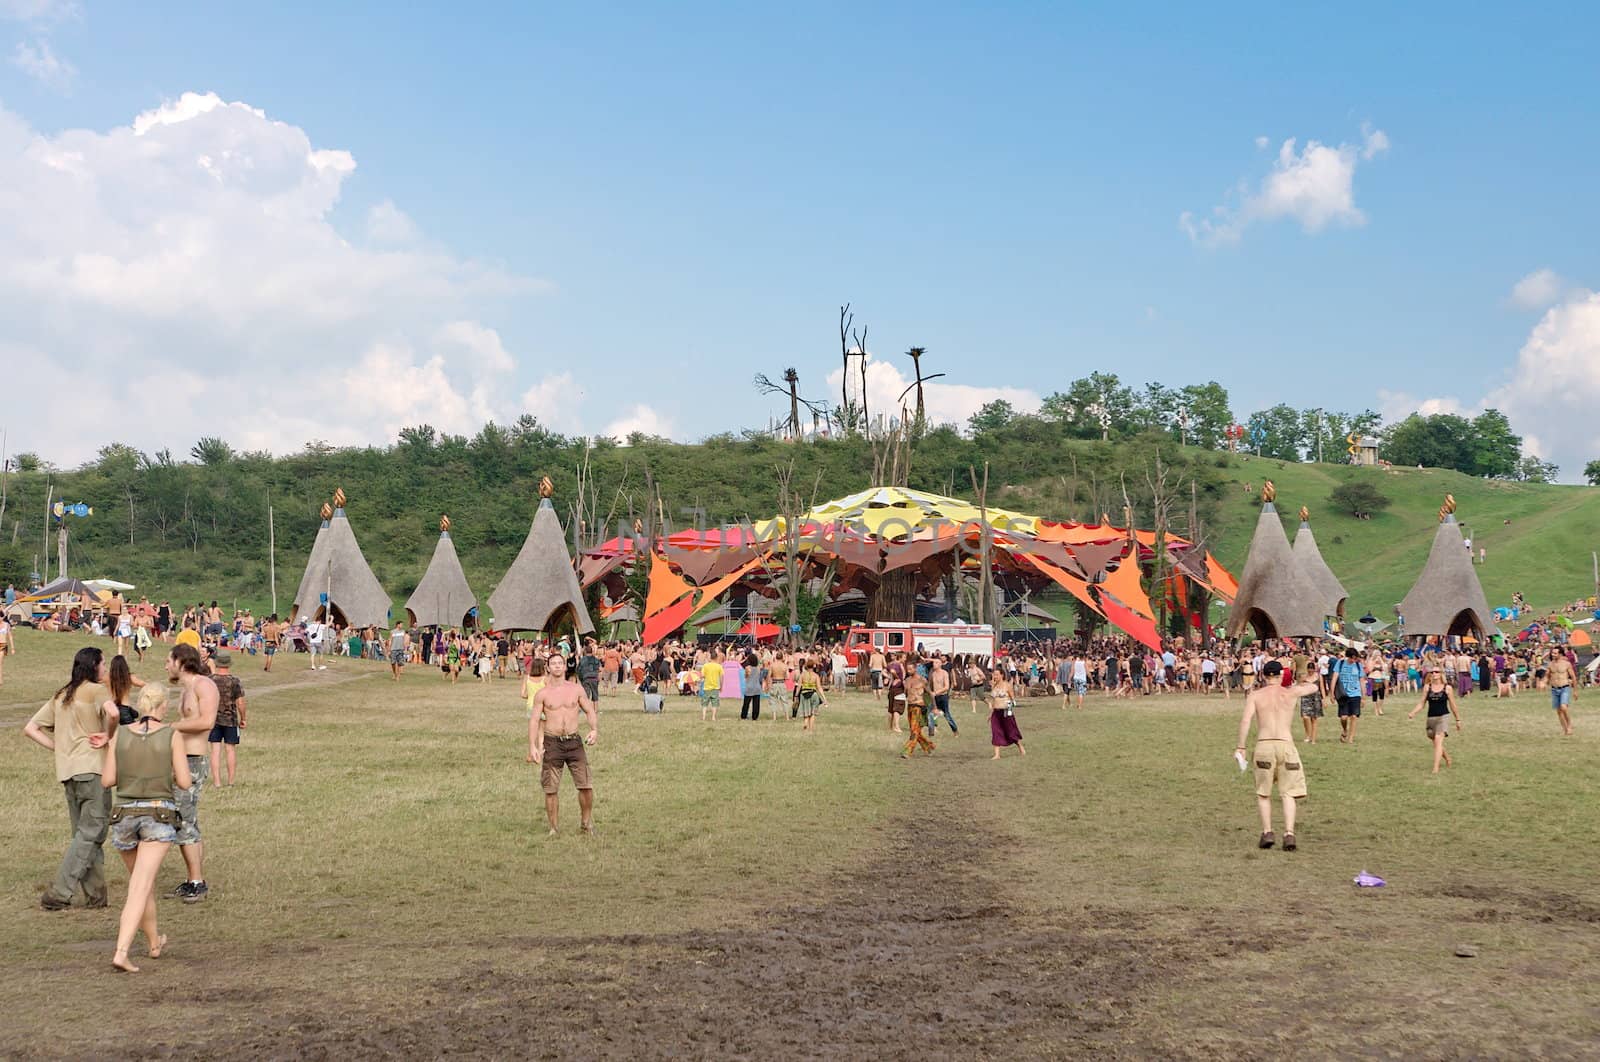 OZORA, HUNGARY - AUGUST 01: Main stage on Ozora Festival, one of the greatest psychedelic music gathering in Euorpe. Ozora, Hungary, Europe August 01, 2014.